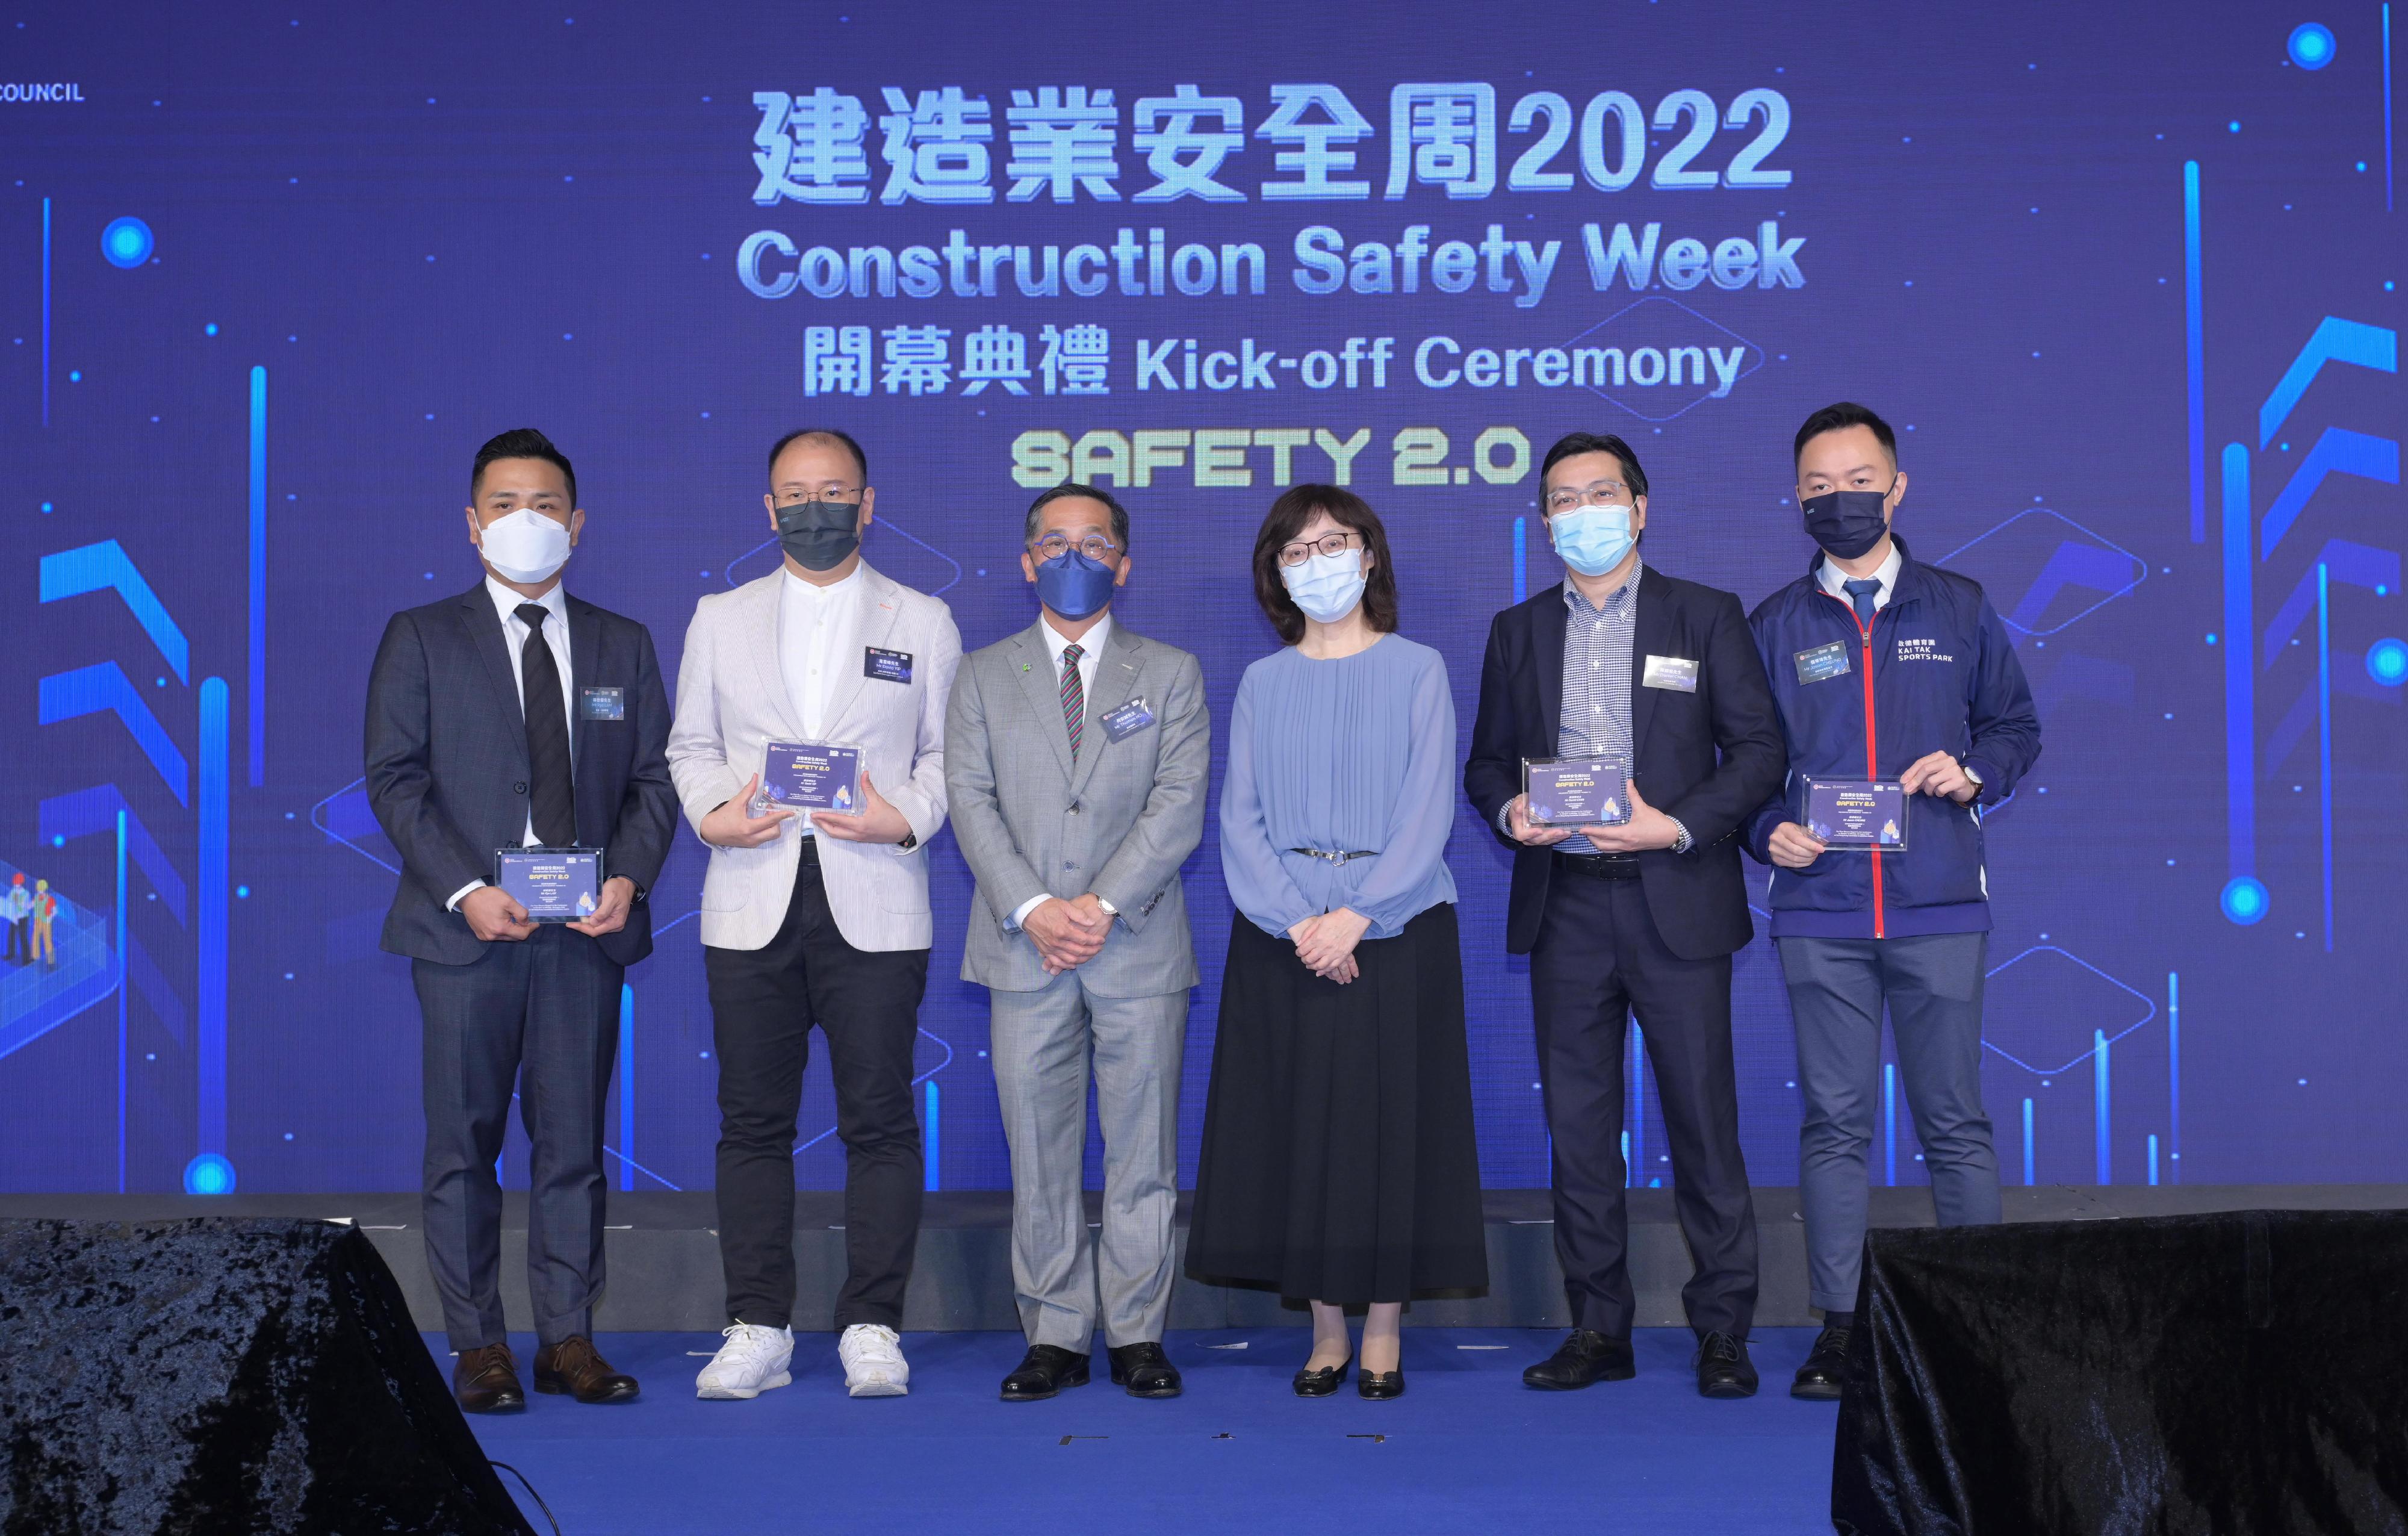 Construction Safety Week 2022 is being held from today (August 29) to September 2. Photo shows the Secretary for Development, Ms Bernadette Linn (third right), and the Chairman of the Construction Industry Council, Mr Thomas Ho (third left), having presented souvenirs to conference speakers of Construction Safety Week 2022.